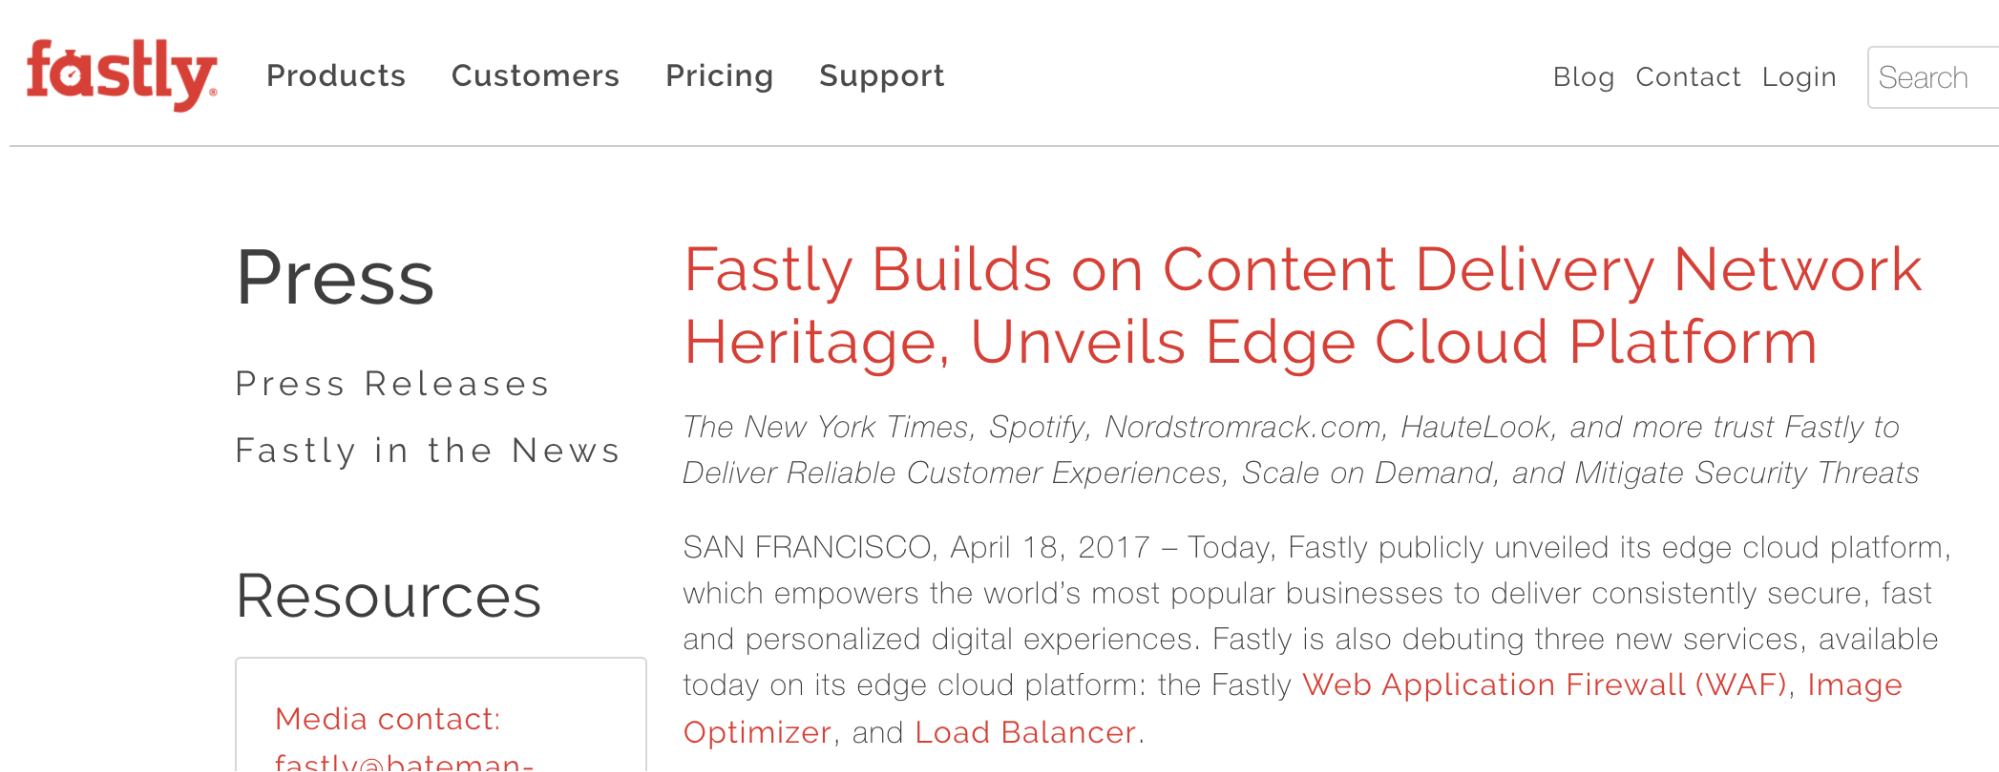 Announcement from Fastly about their Edge Cloud Platform category.